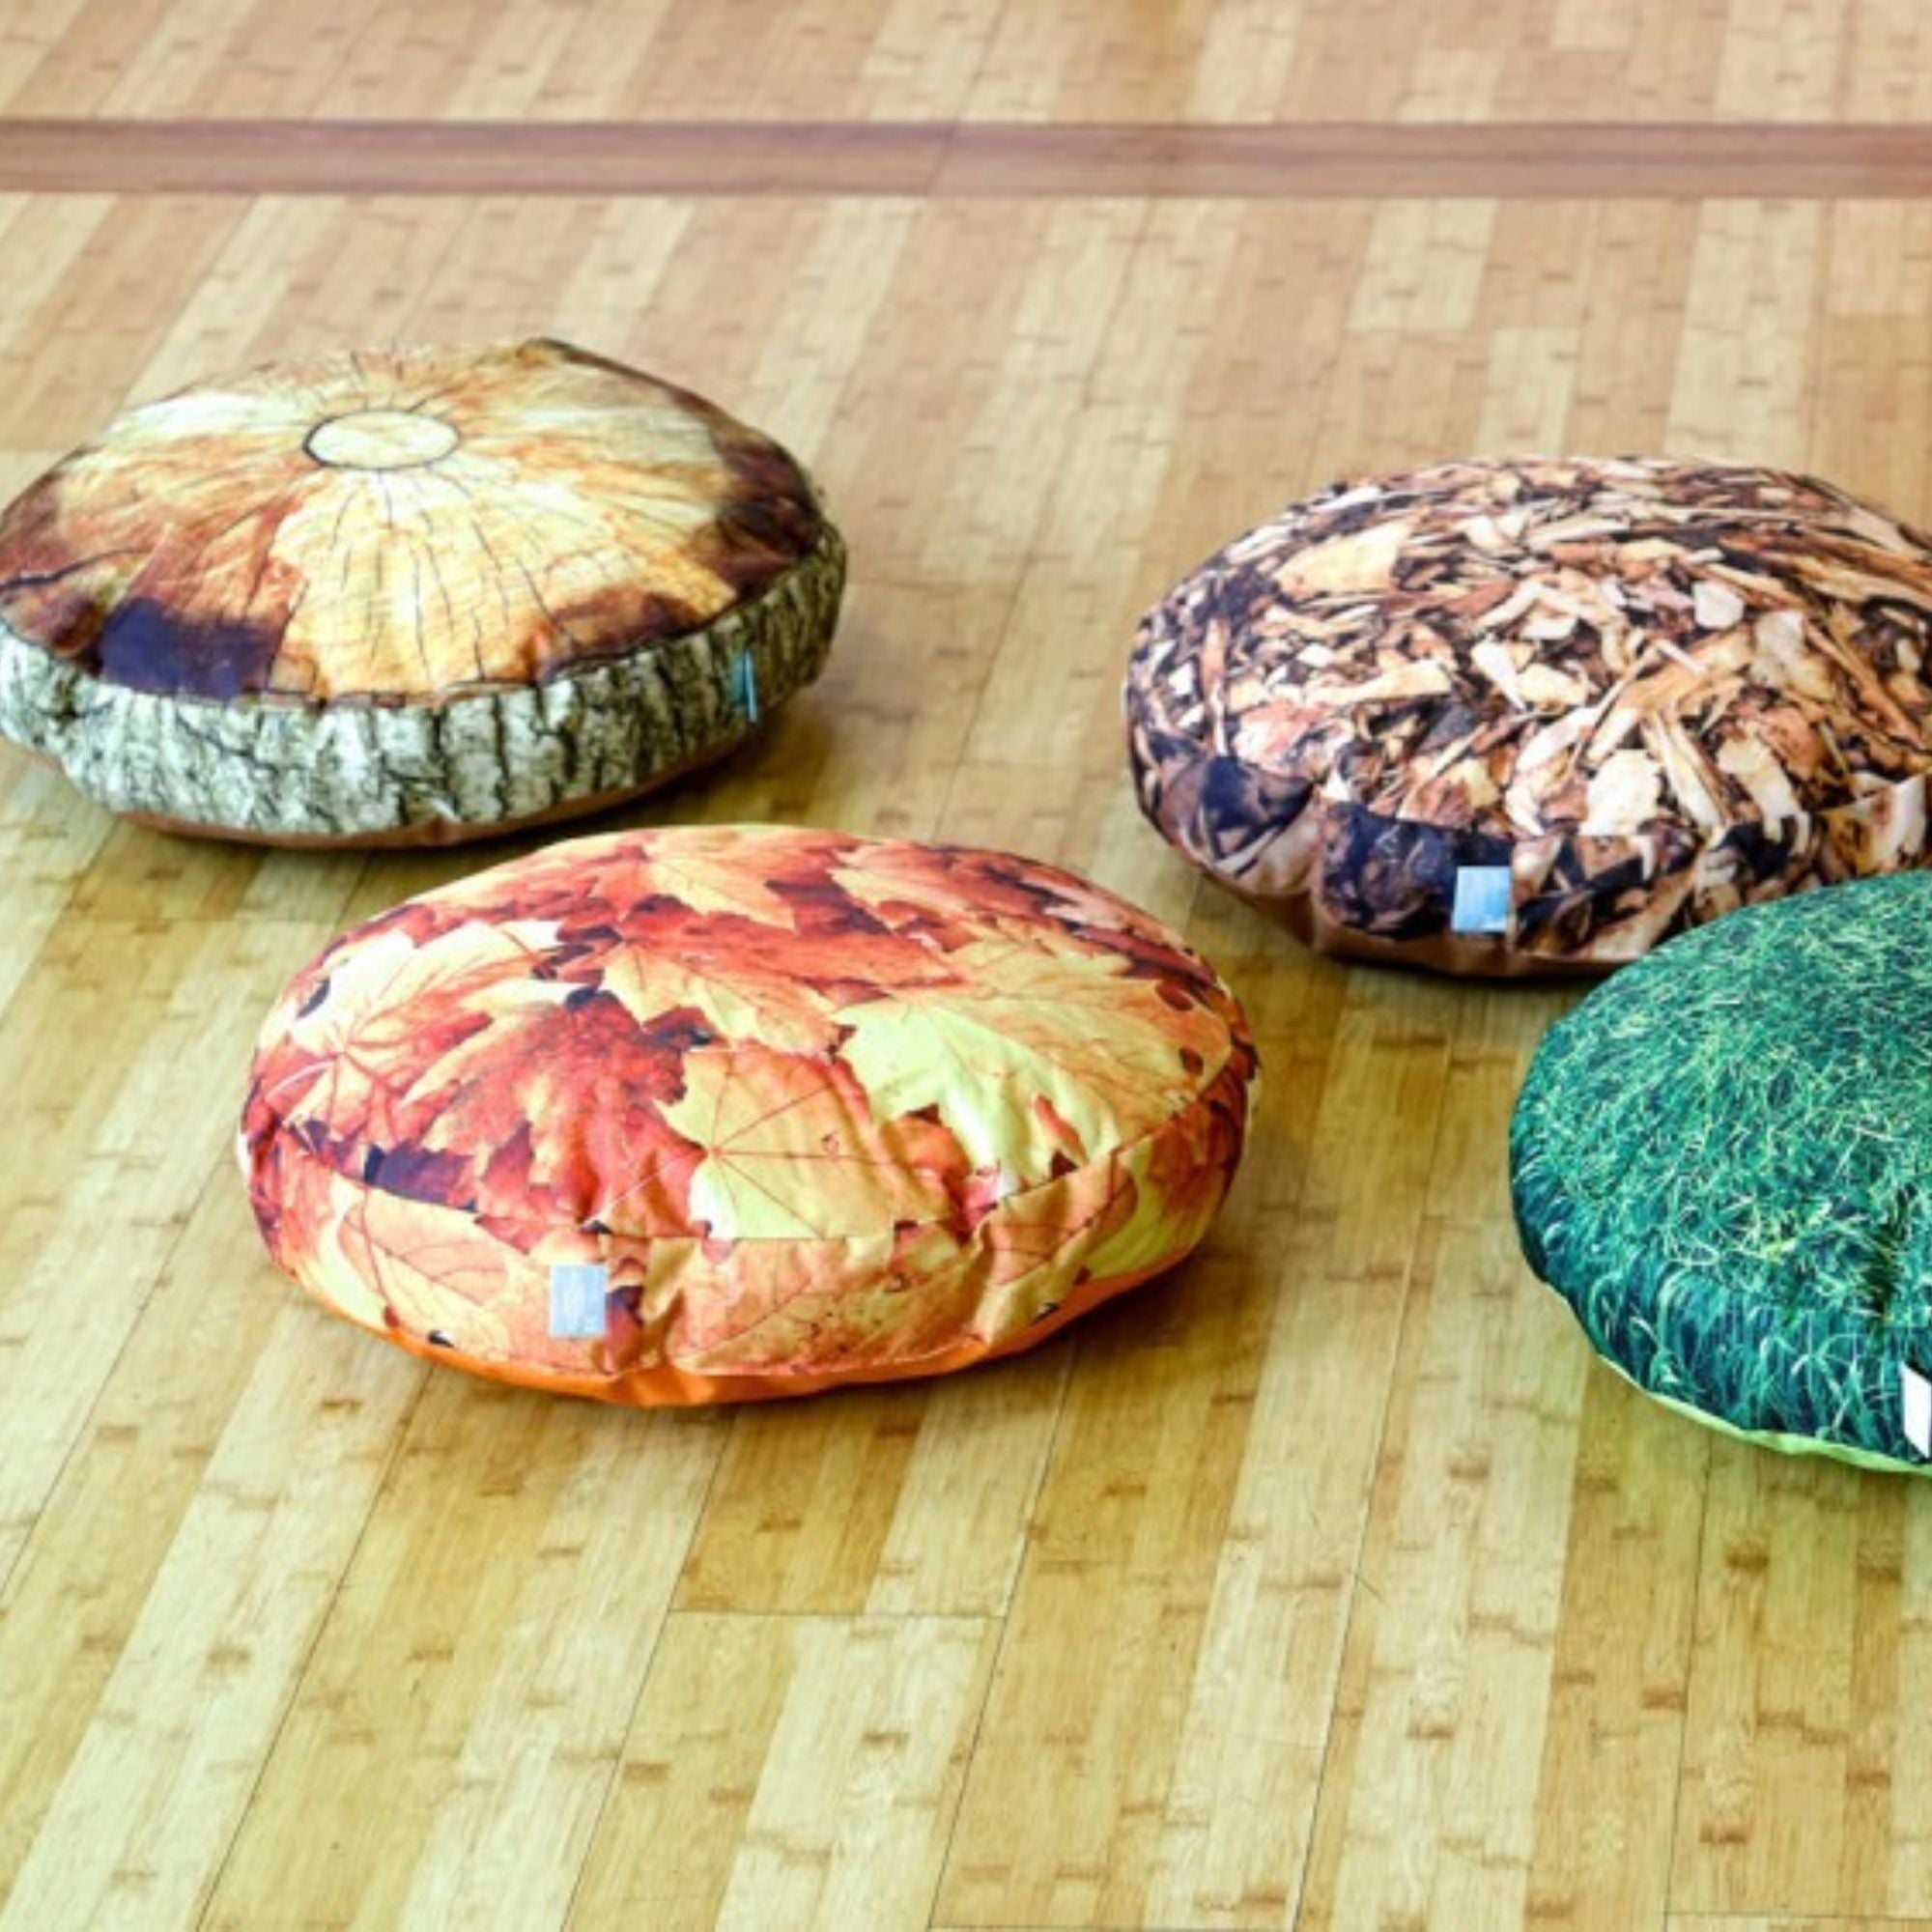 Natural World Nature Cushions Polyester, Our soft furnishing range can be used to enhance a room setting and help create a cosy, comfortable space for learning and play. The Natural World Nature Cushions Polyester are a delightful addition to our woodland range with realistic designs to fire curiosity and imagination and bring the outdoors in to the classroom environment. These high quality, wipe clean Polyester cushions are great for supporting fundamental areas of learning and development such as Understa